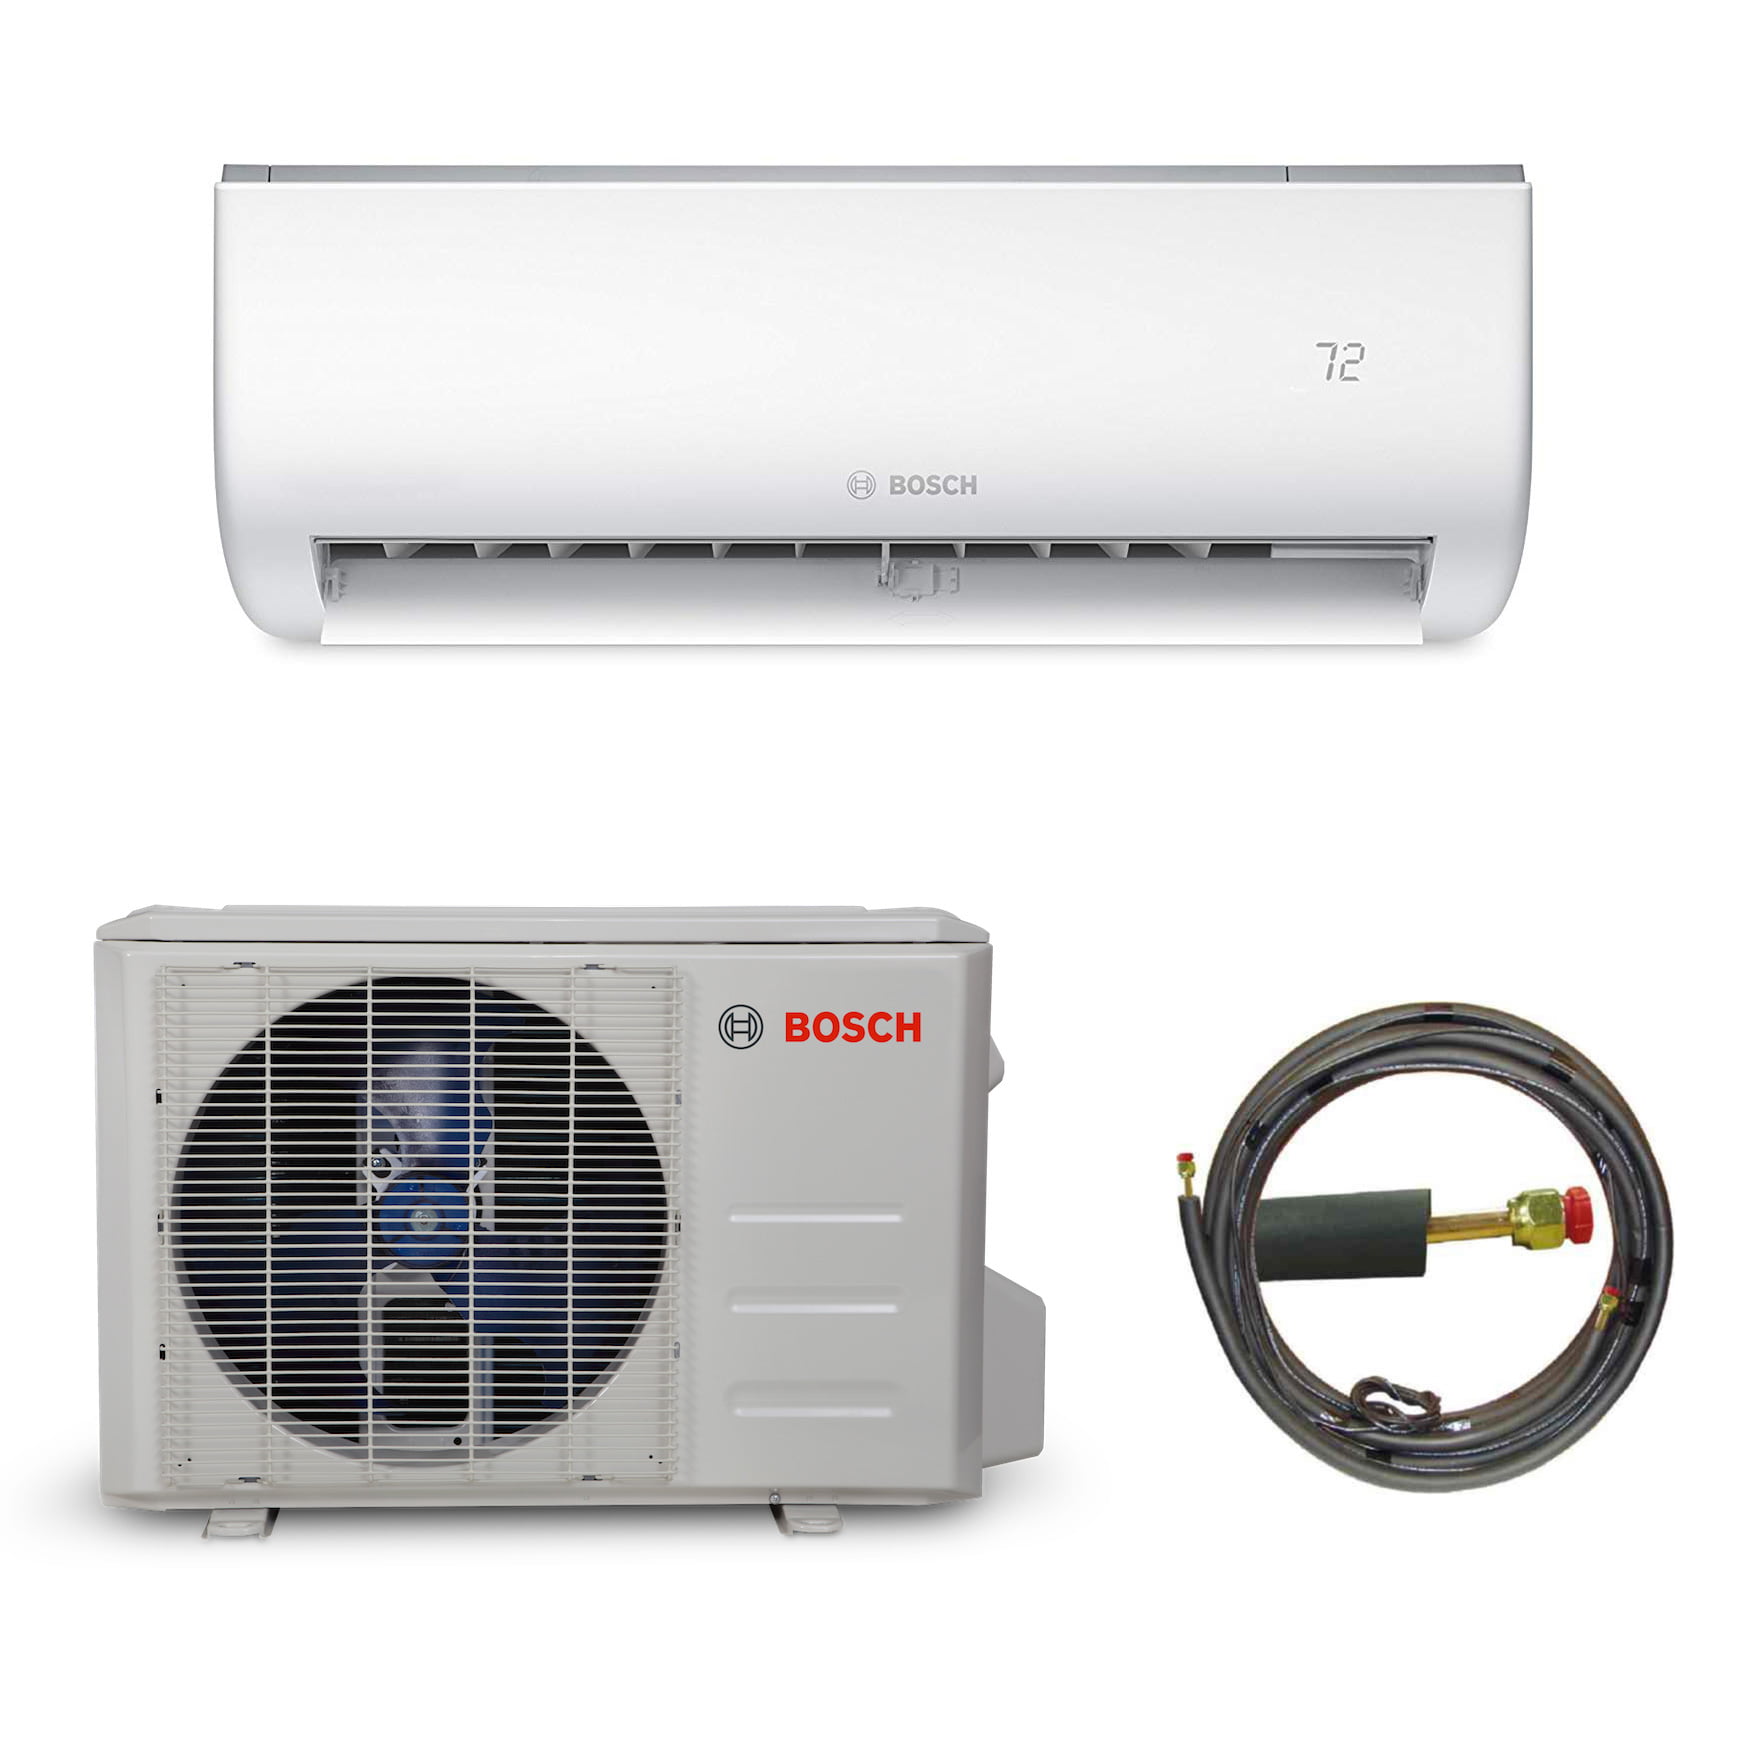 EEC A for 40 m² Rooms Heat Pump 12000 BTU Comfee MSR23-12HRDN1-QE Inverter Split-Version Air Conditioner with Quick-Connector